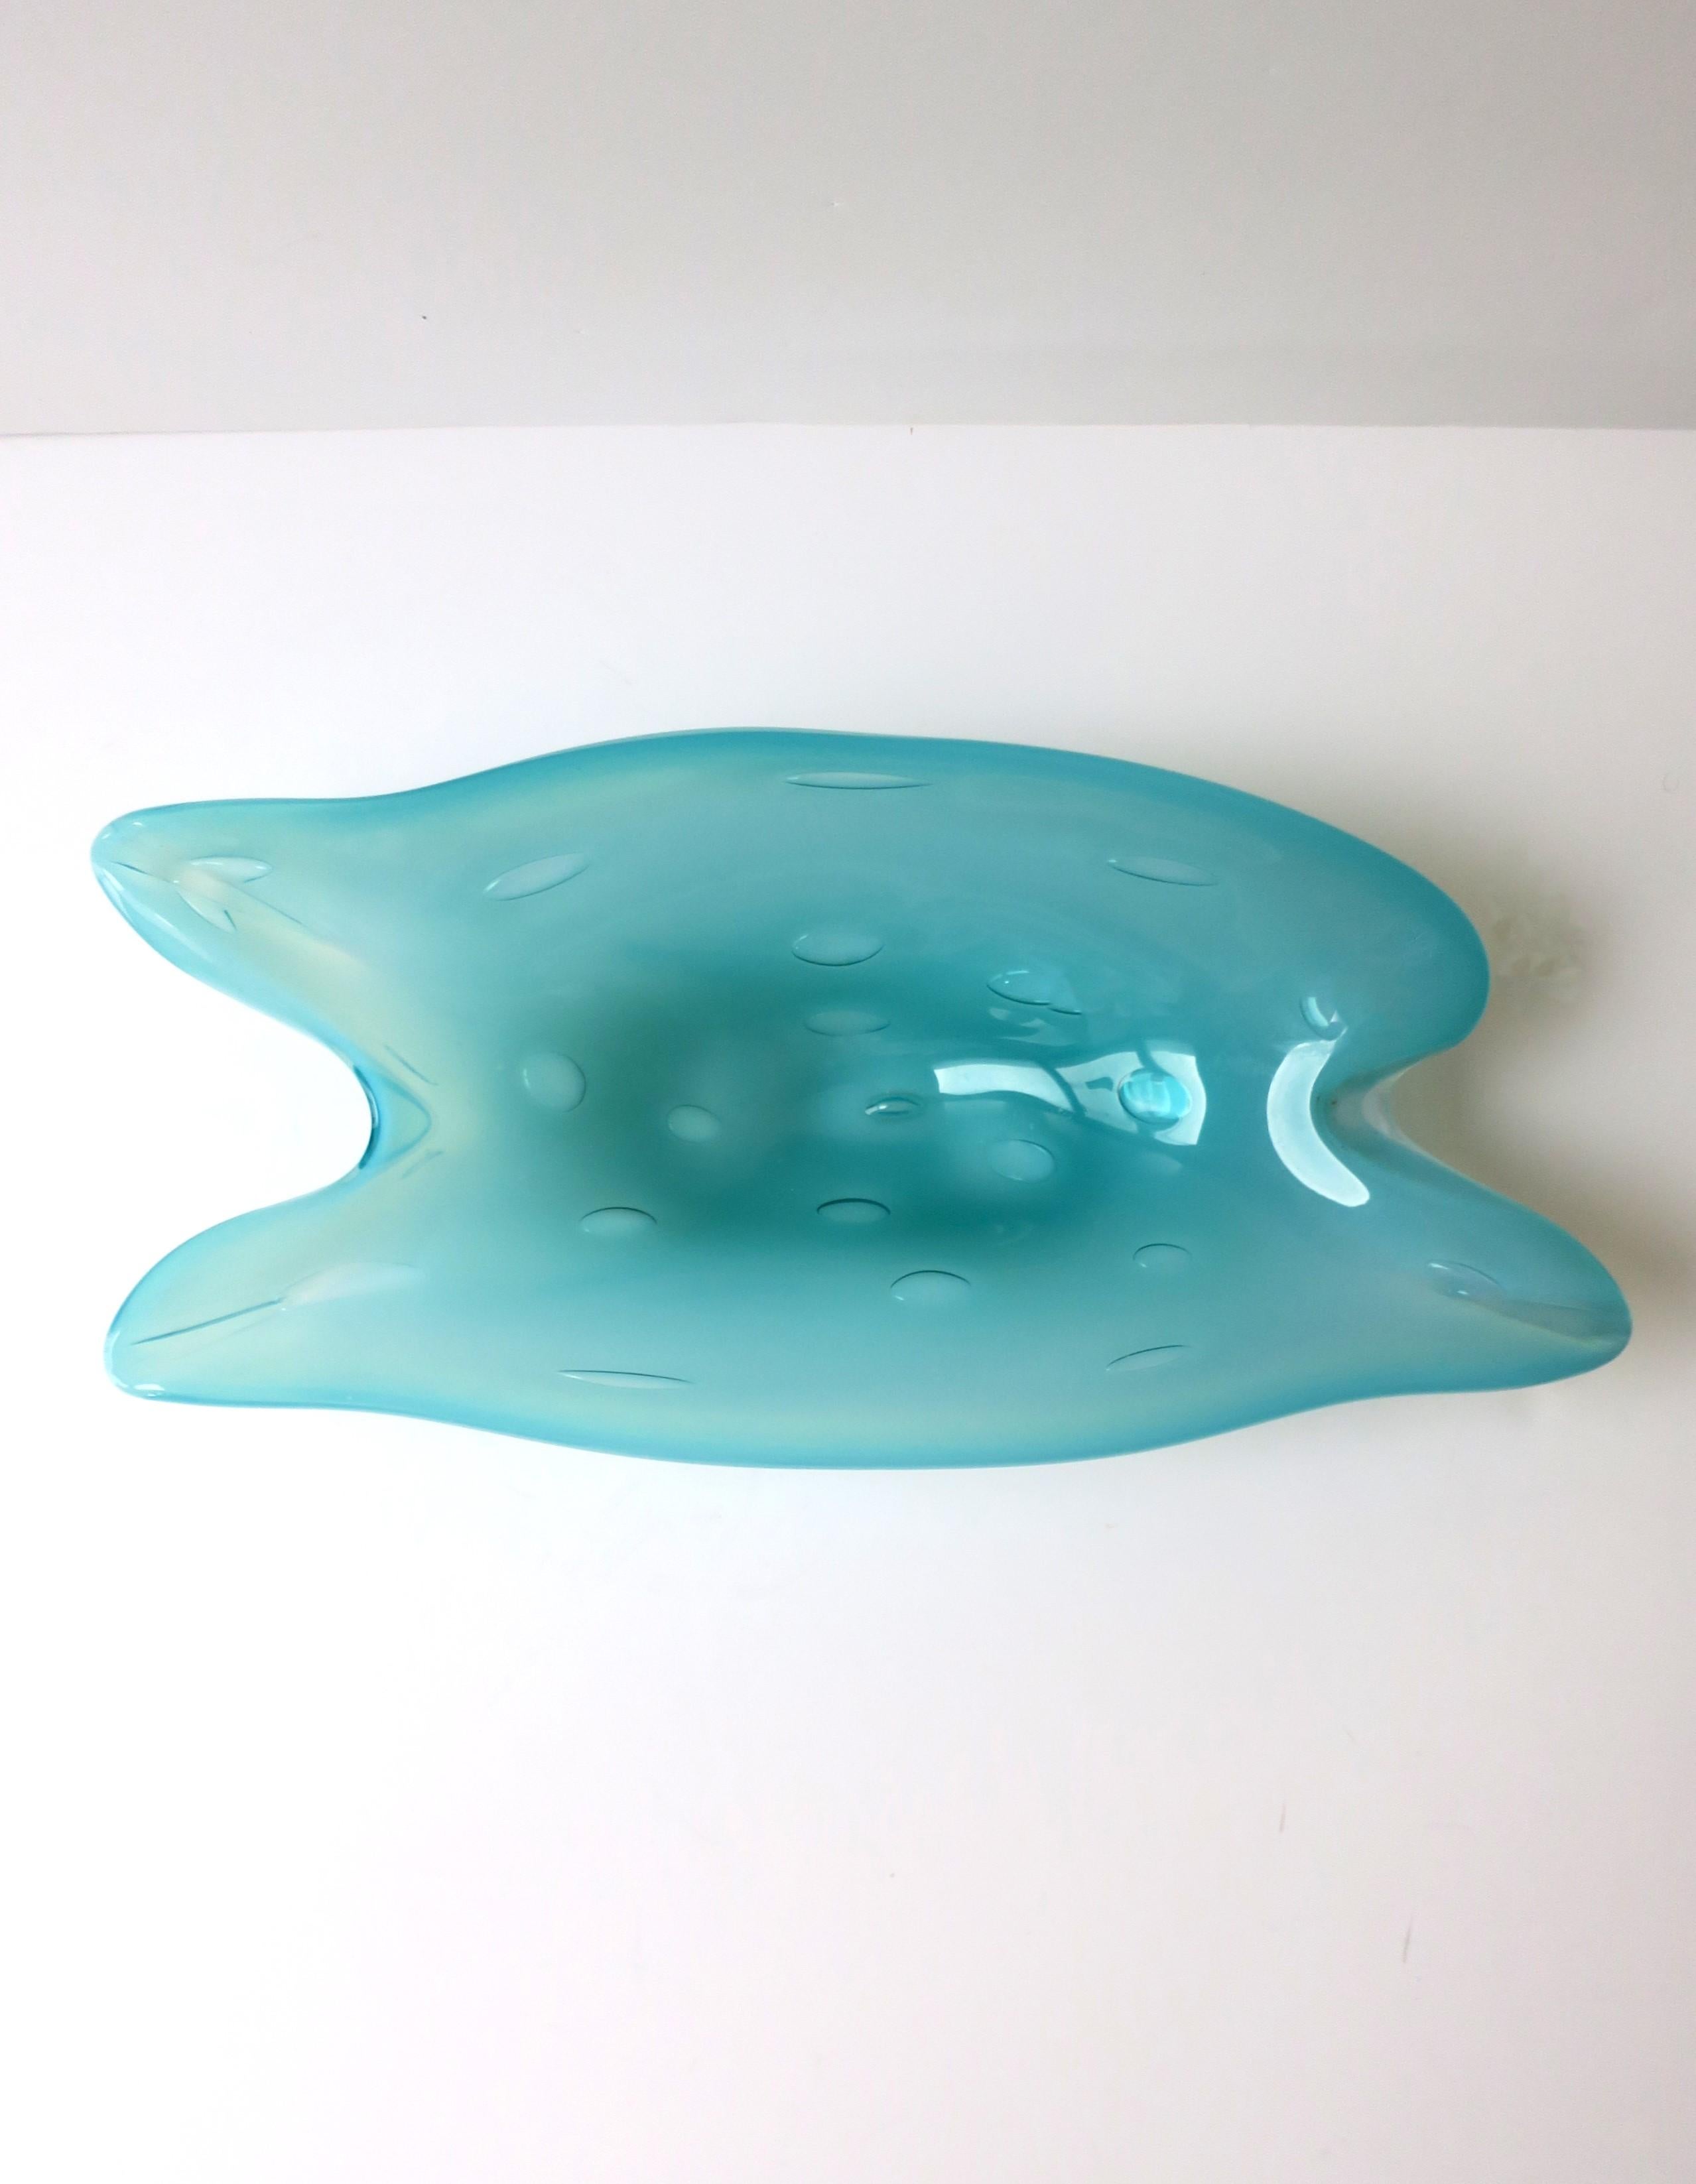 An Italian Murano turquoise blue art glass bowl, in an organic modern form and a big, controlled bubble design, in the style of Barovier & Toso, circa mid-20th century, Italy. A beautiful blue hue and great piece for a sideboard/credenza, cocktail